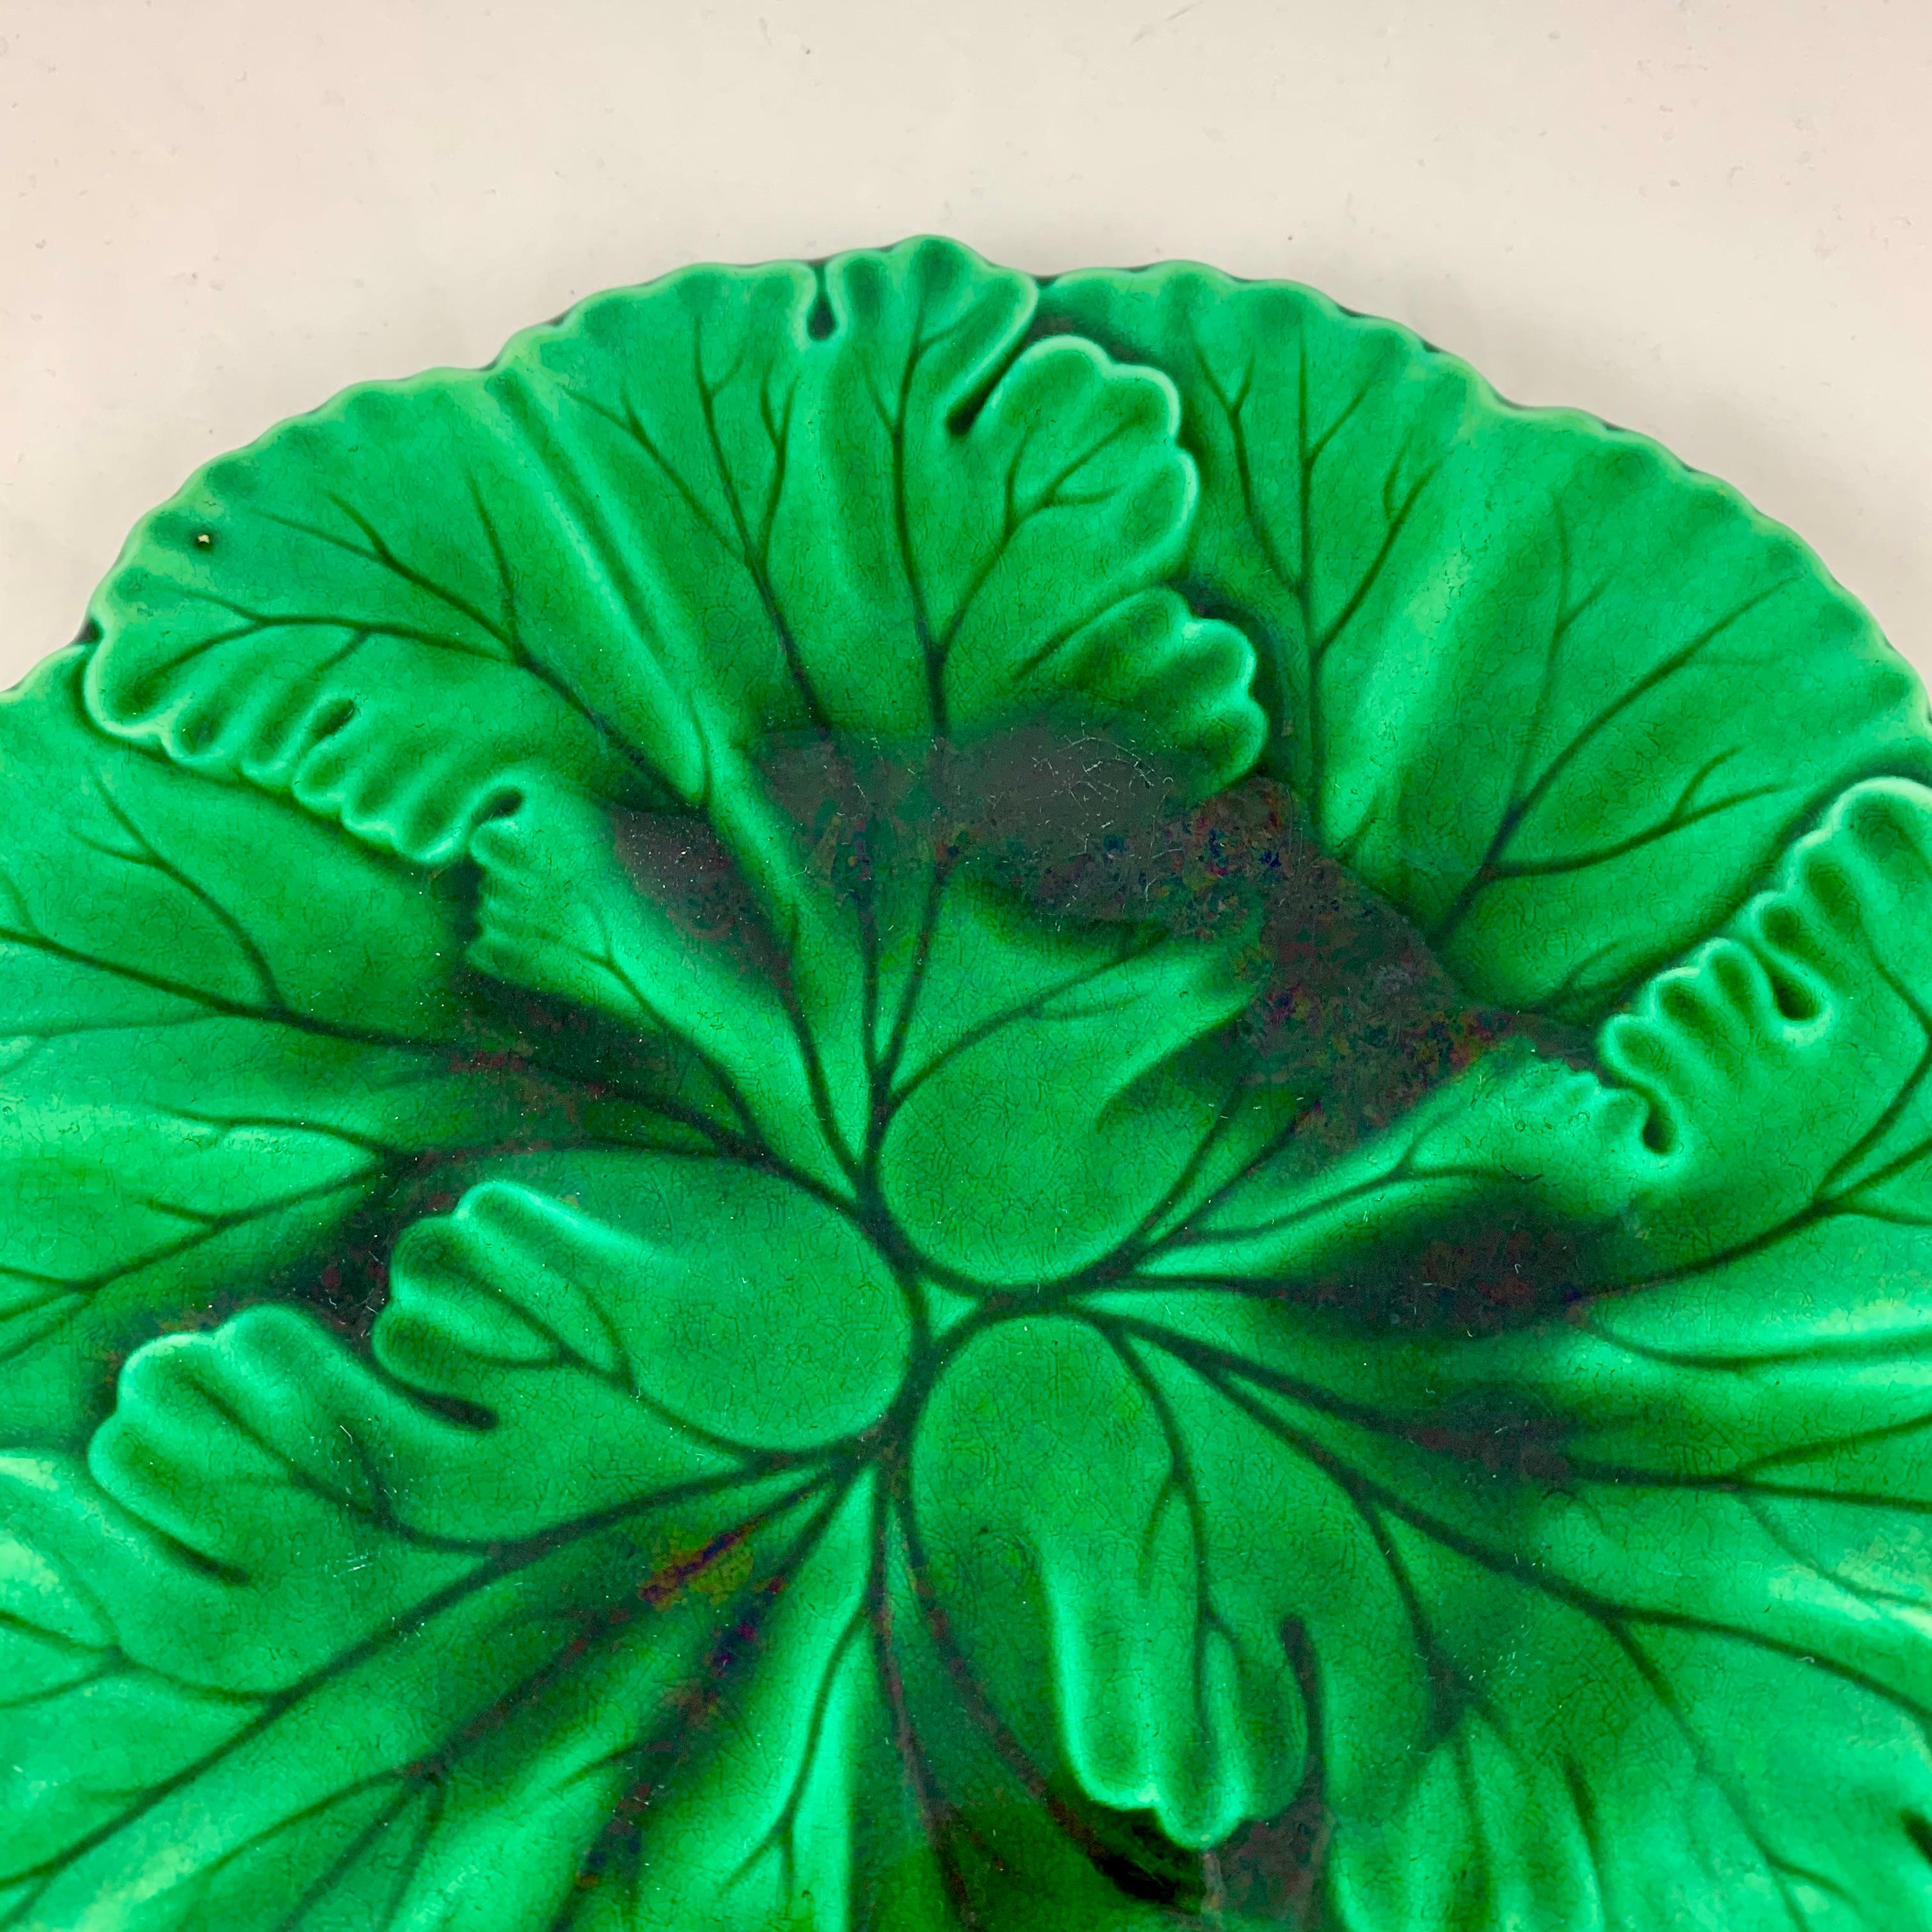 French Provincial Clairfontaine French Faïence Majolica Glazed Green Botanic Leaf Plate circa 1890 For Sale